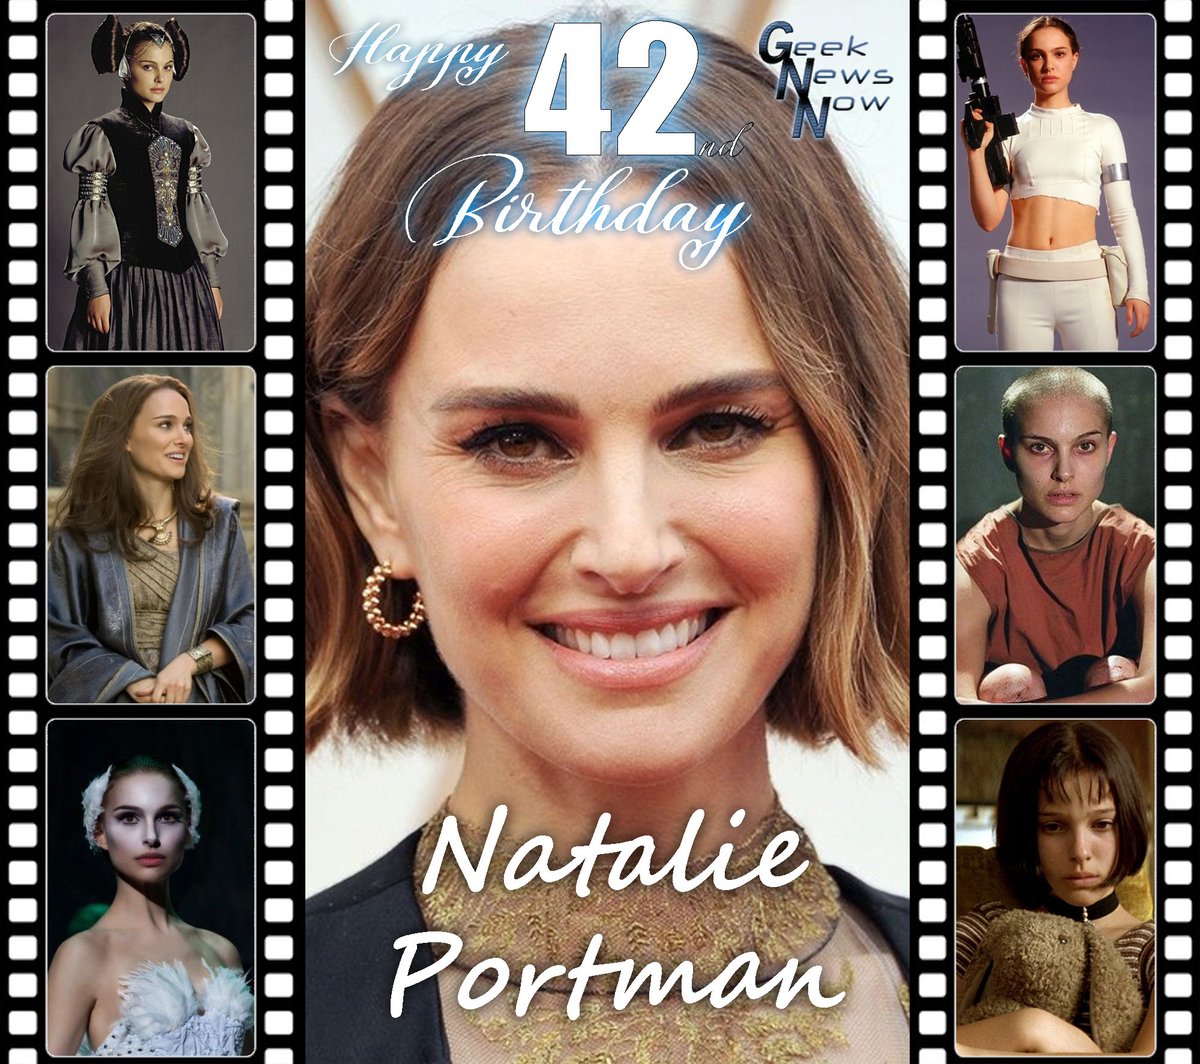 Happy Birthday to #NataliePortman.  She got her start with Jean Reno in #theprofessional and took off as #queenamidala I'm the #prequeltrilogy.  Thank for entertaining us all this time. @starwars